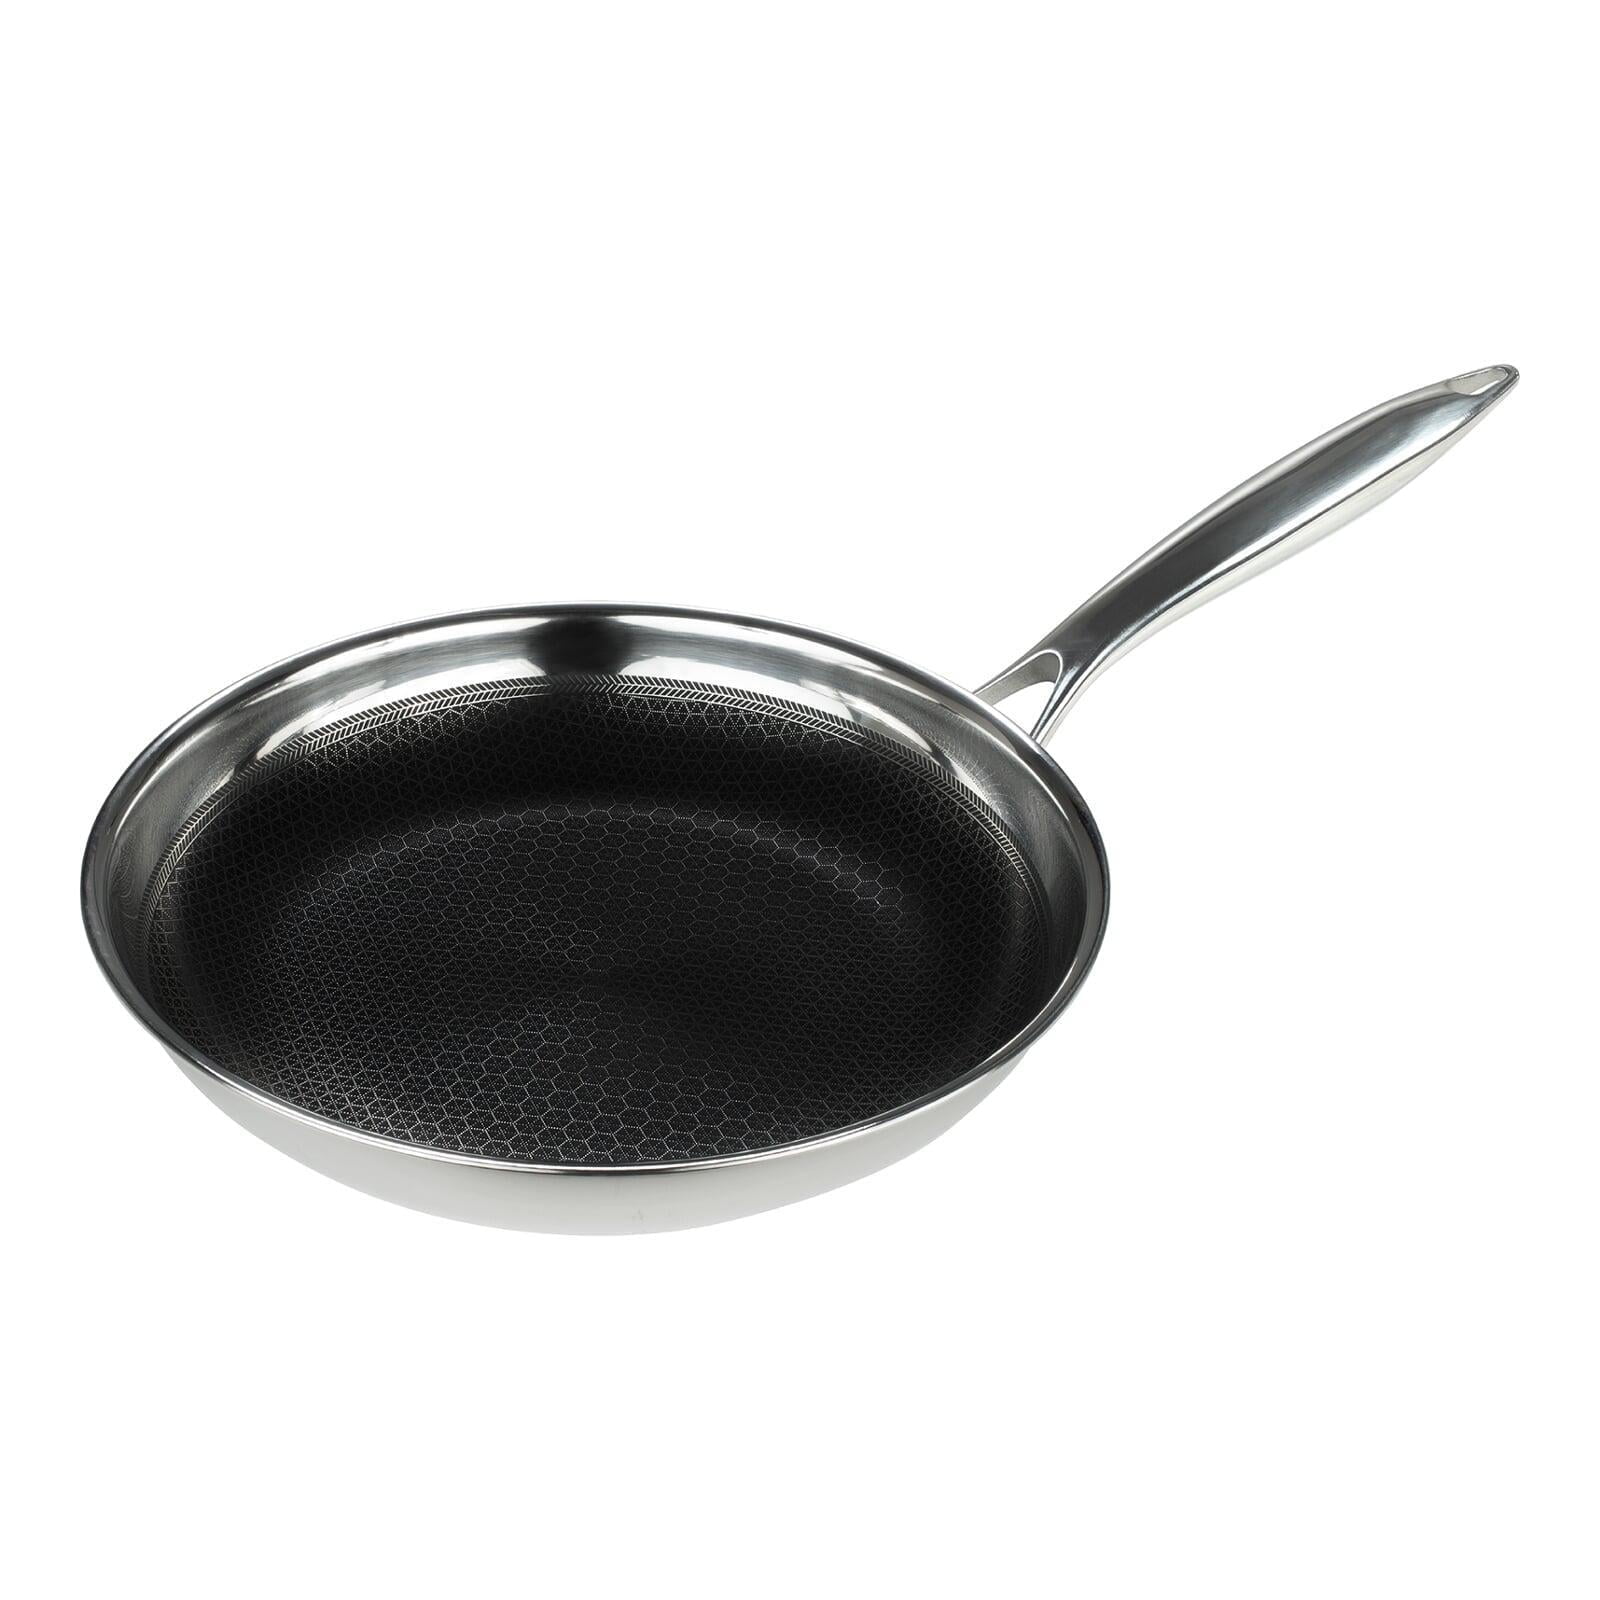 Black Cube Quick Release Stainless Steel Frying Pan, Oven-Safe Cookware